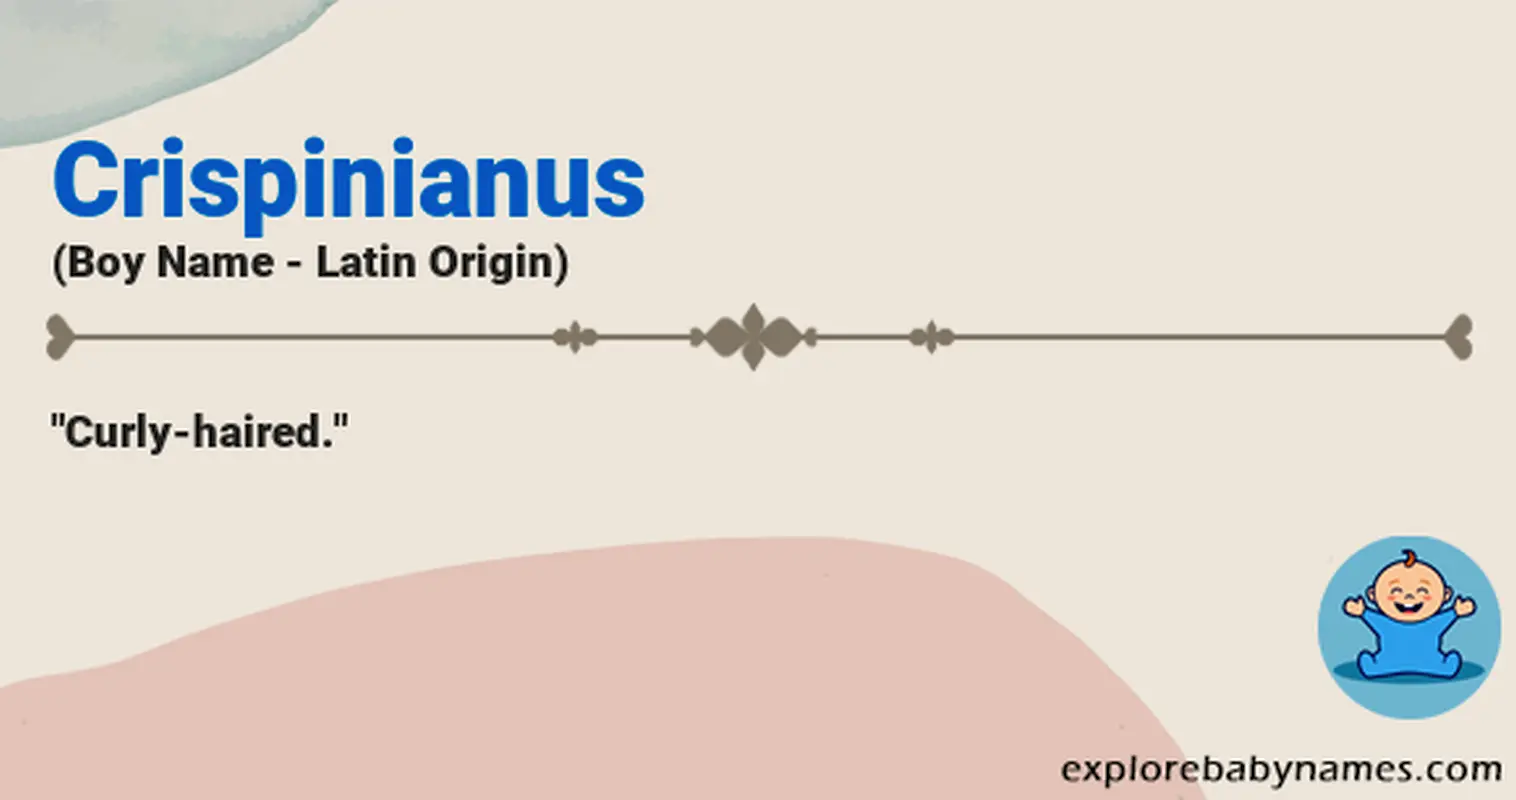 Meaning of Crispinianus